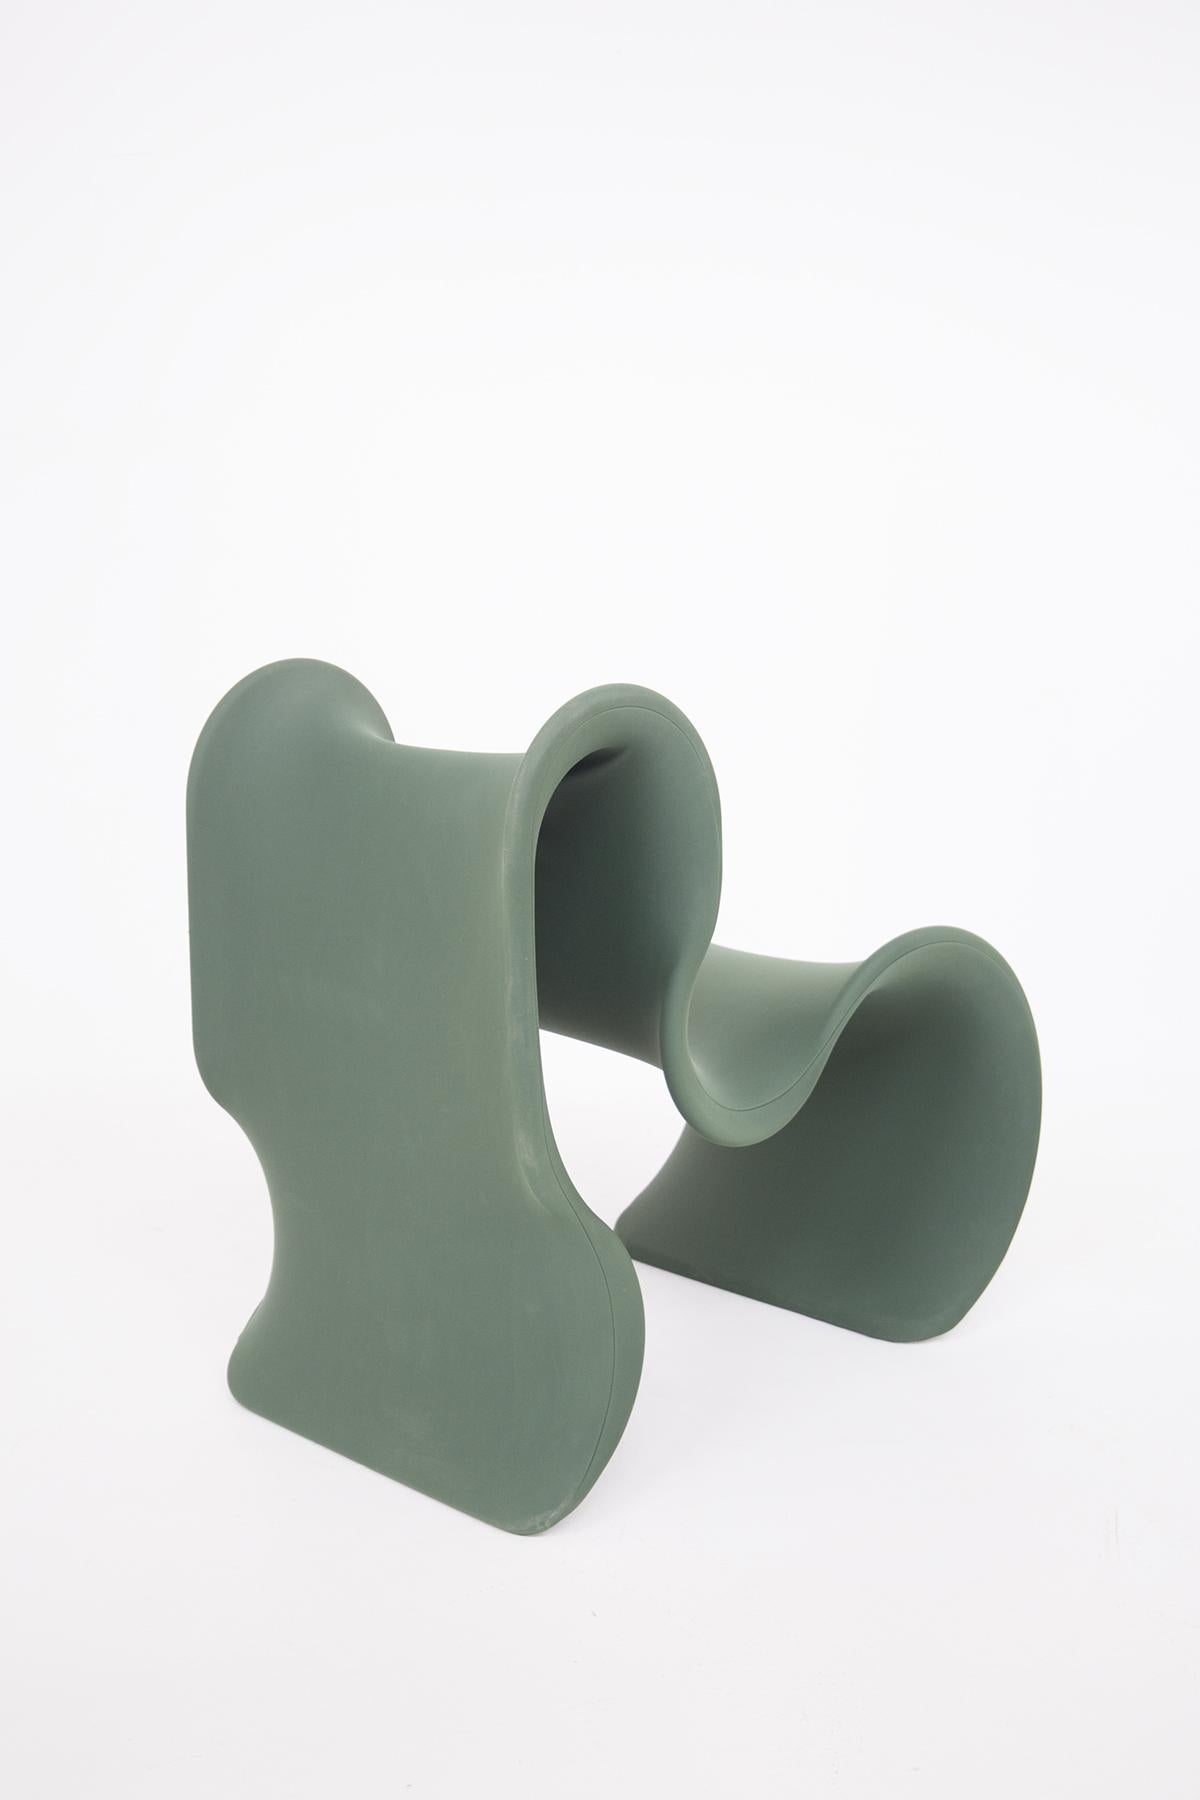 Fabric Fiocco Armchair in Dark Green by Gianni Pareschi for Busnelli For Sale